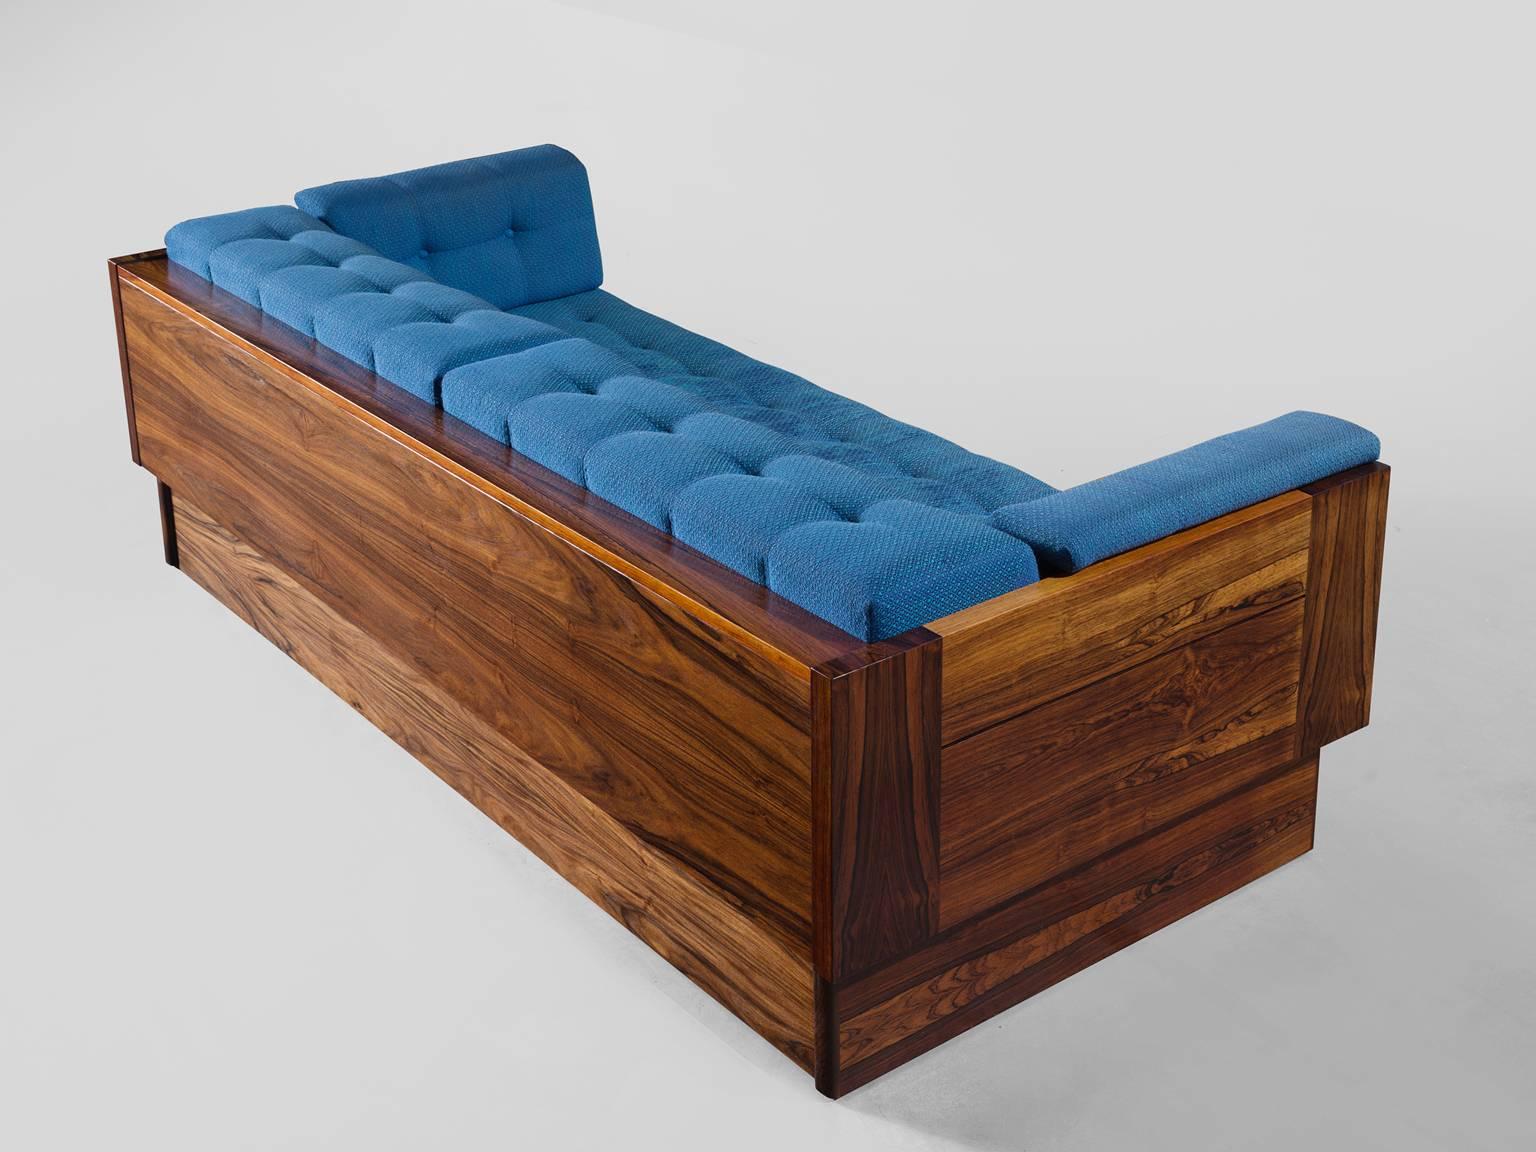 Daybed, rosewood, fabric, foam, Norway, 1960s.

Stately and comfortable sofa. This three-seat sofa is robust and simplistic at the same time. The warm grains of the rosewood are complimentary to the geometric and strong rosewood frame. It functions